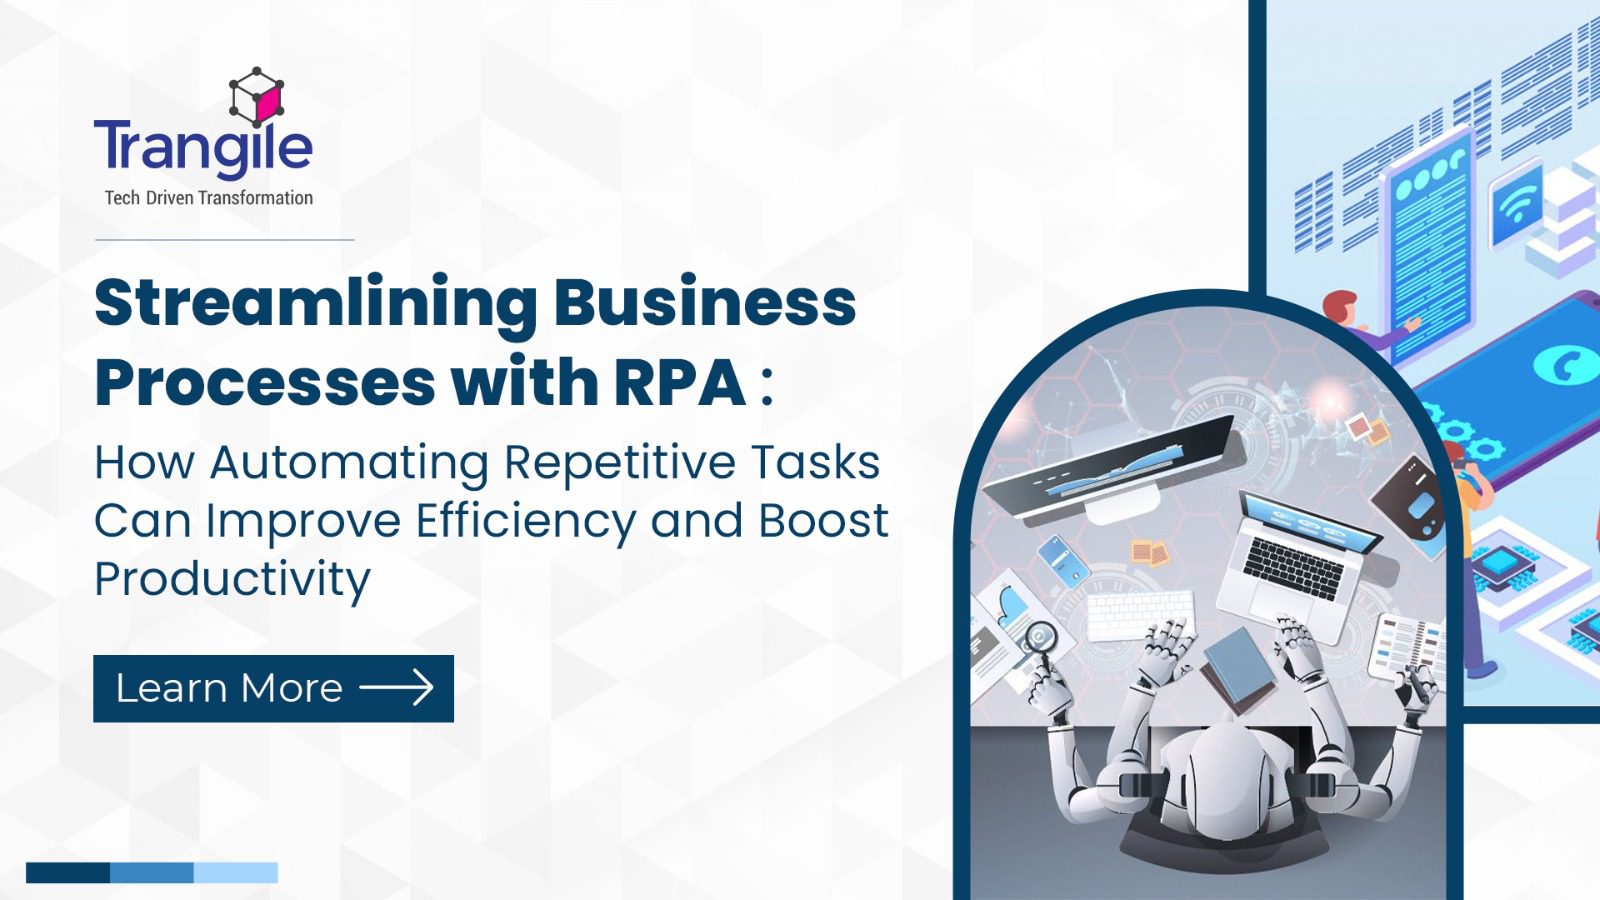 Streamlining Business Processes with RPA: How Automating Repetitive Tasks Can Improve Efficiency and Boost Productivity